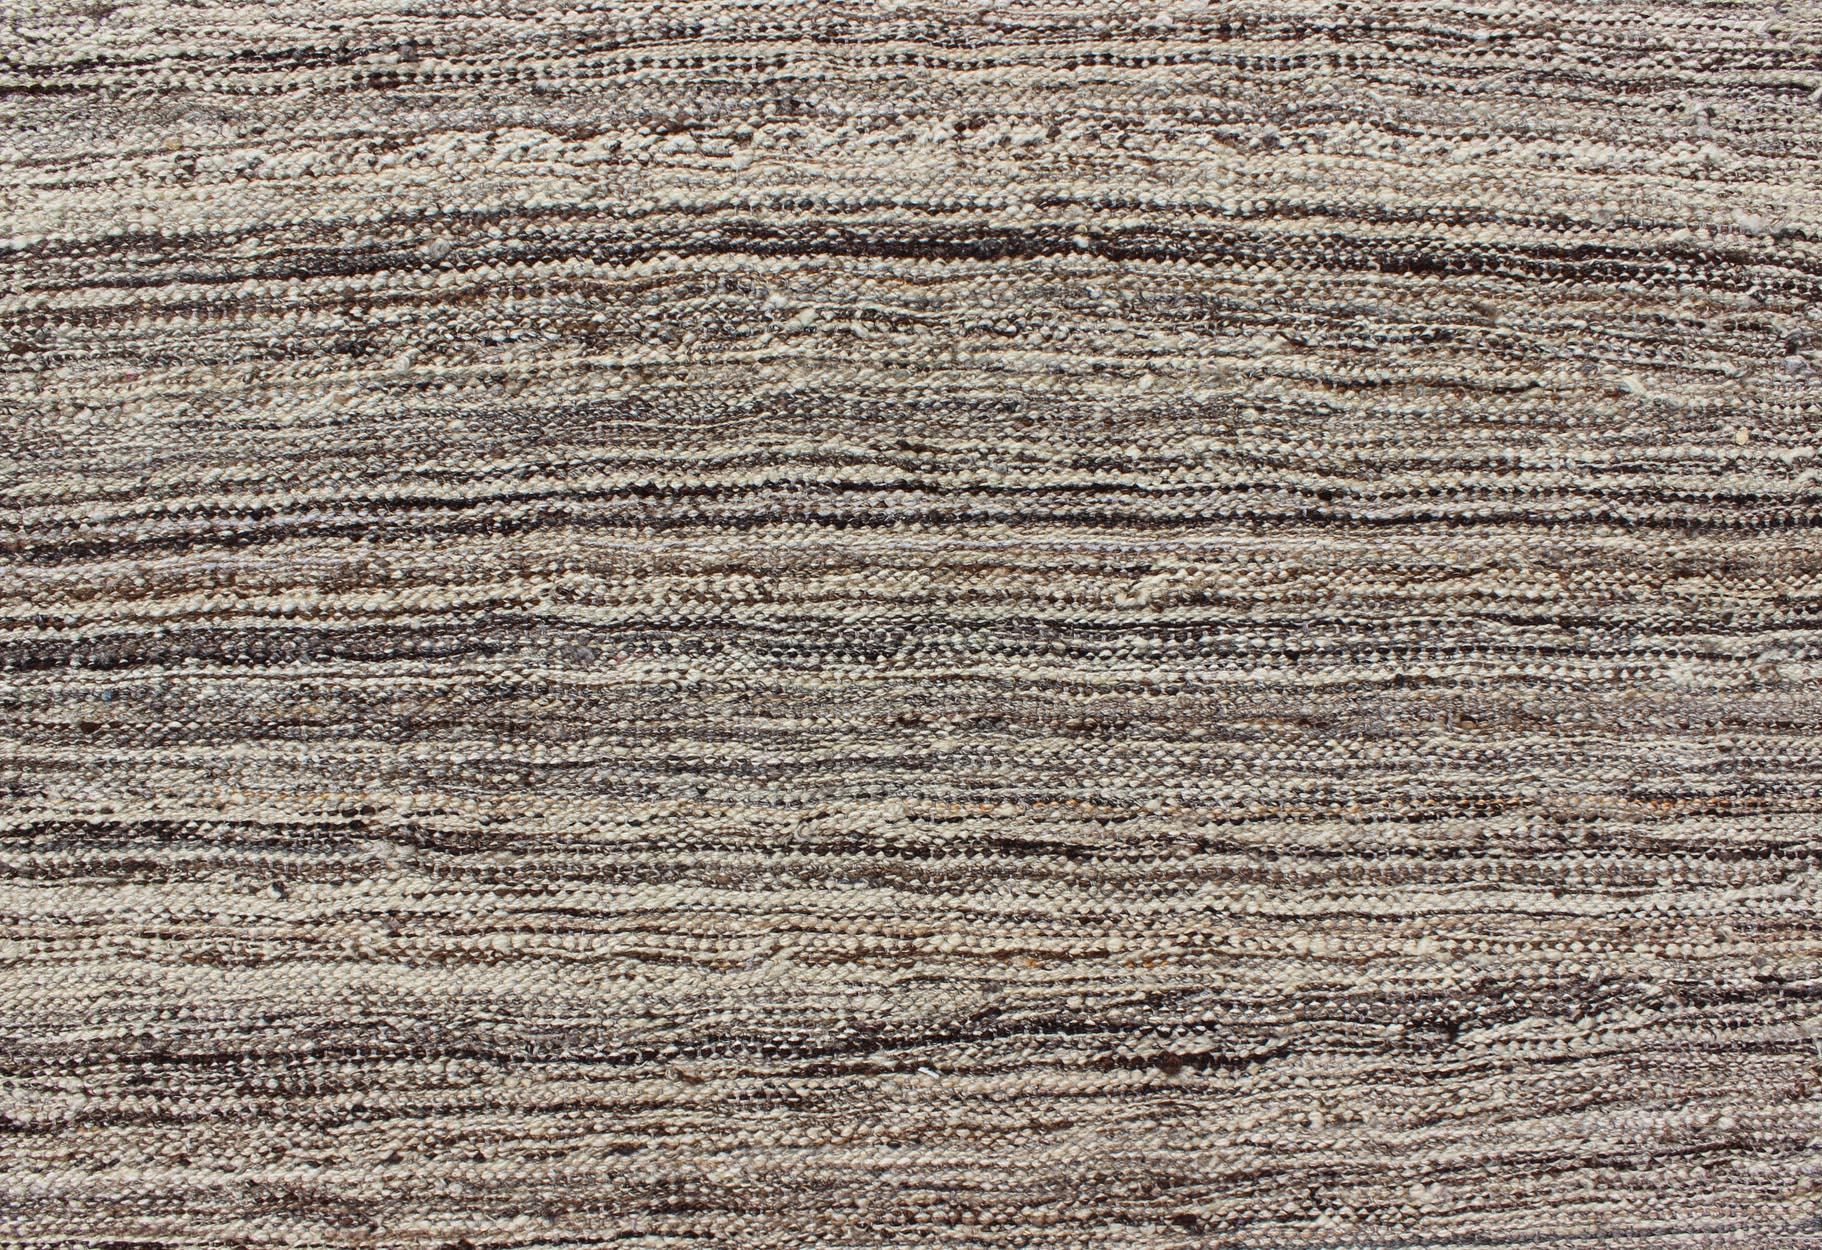 Wool Versatile & Natural Color-Tone Flat-Weave Kilim for a Modern or Classic Design